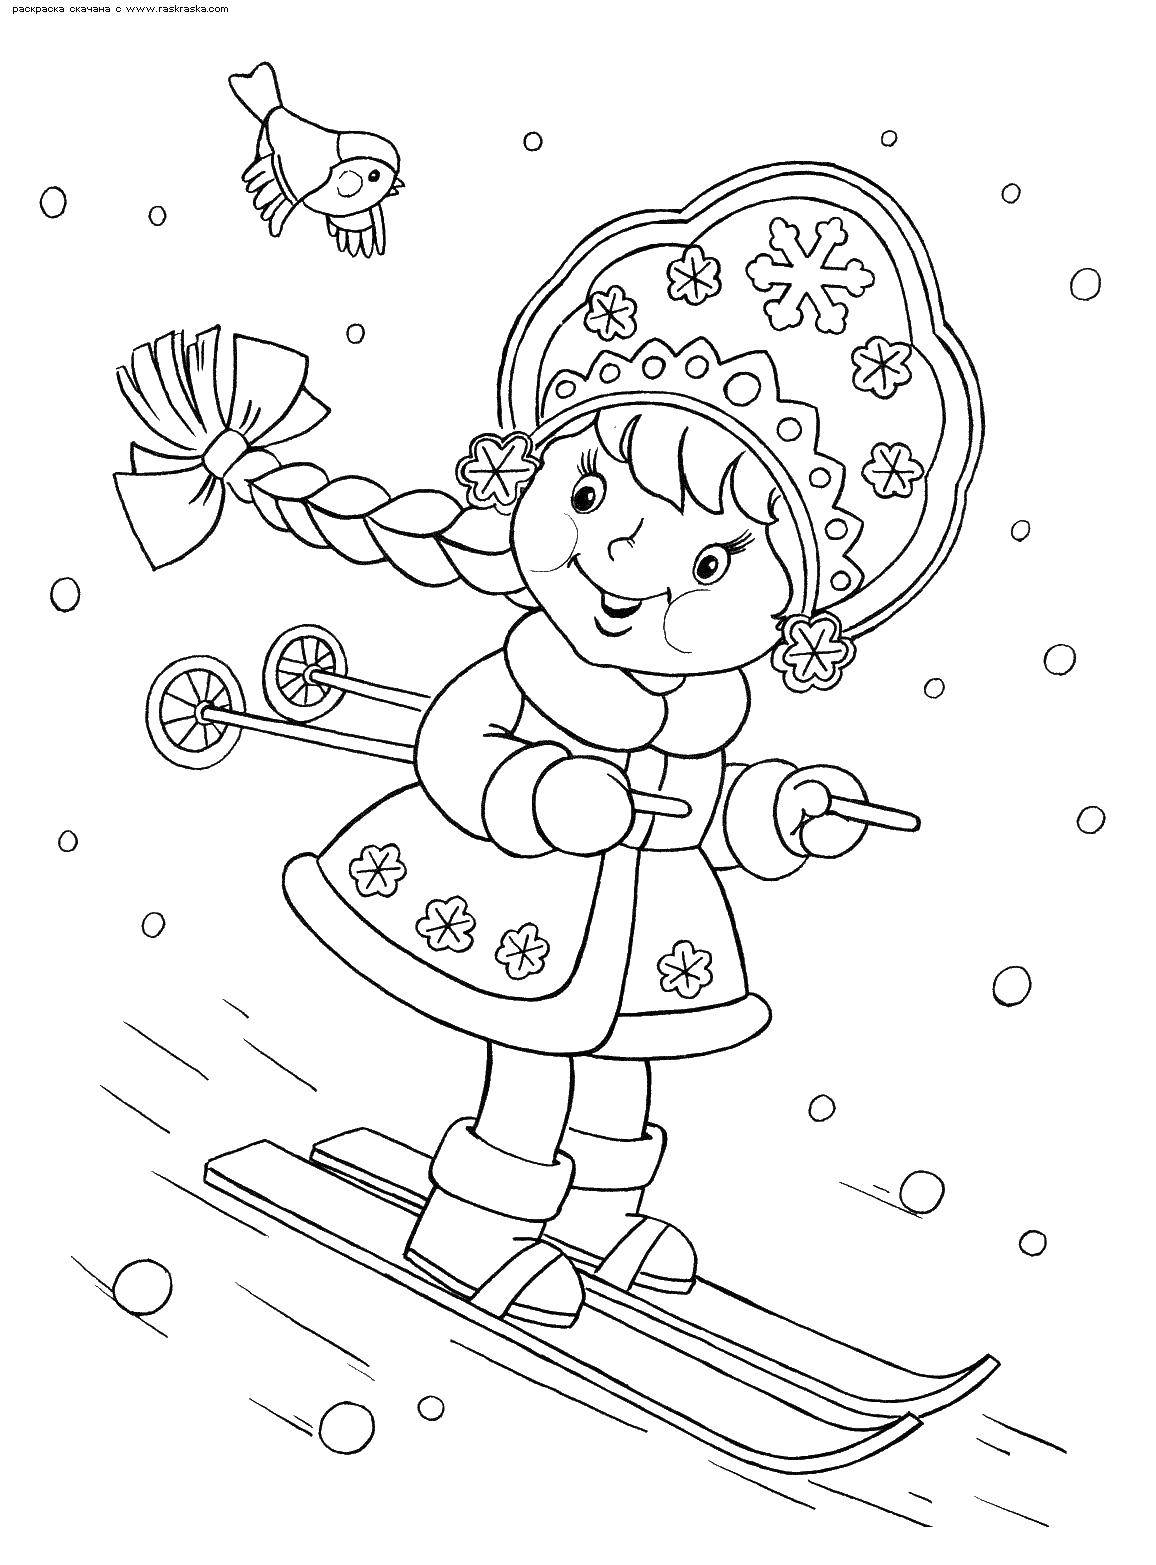 Coloring Snow maiden skiing. Category skiing. Tags:  maiden, skiing.